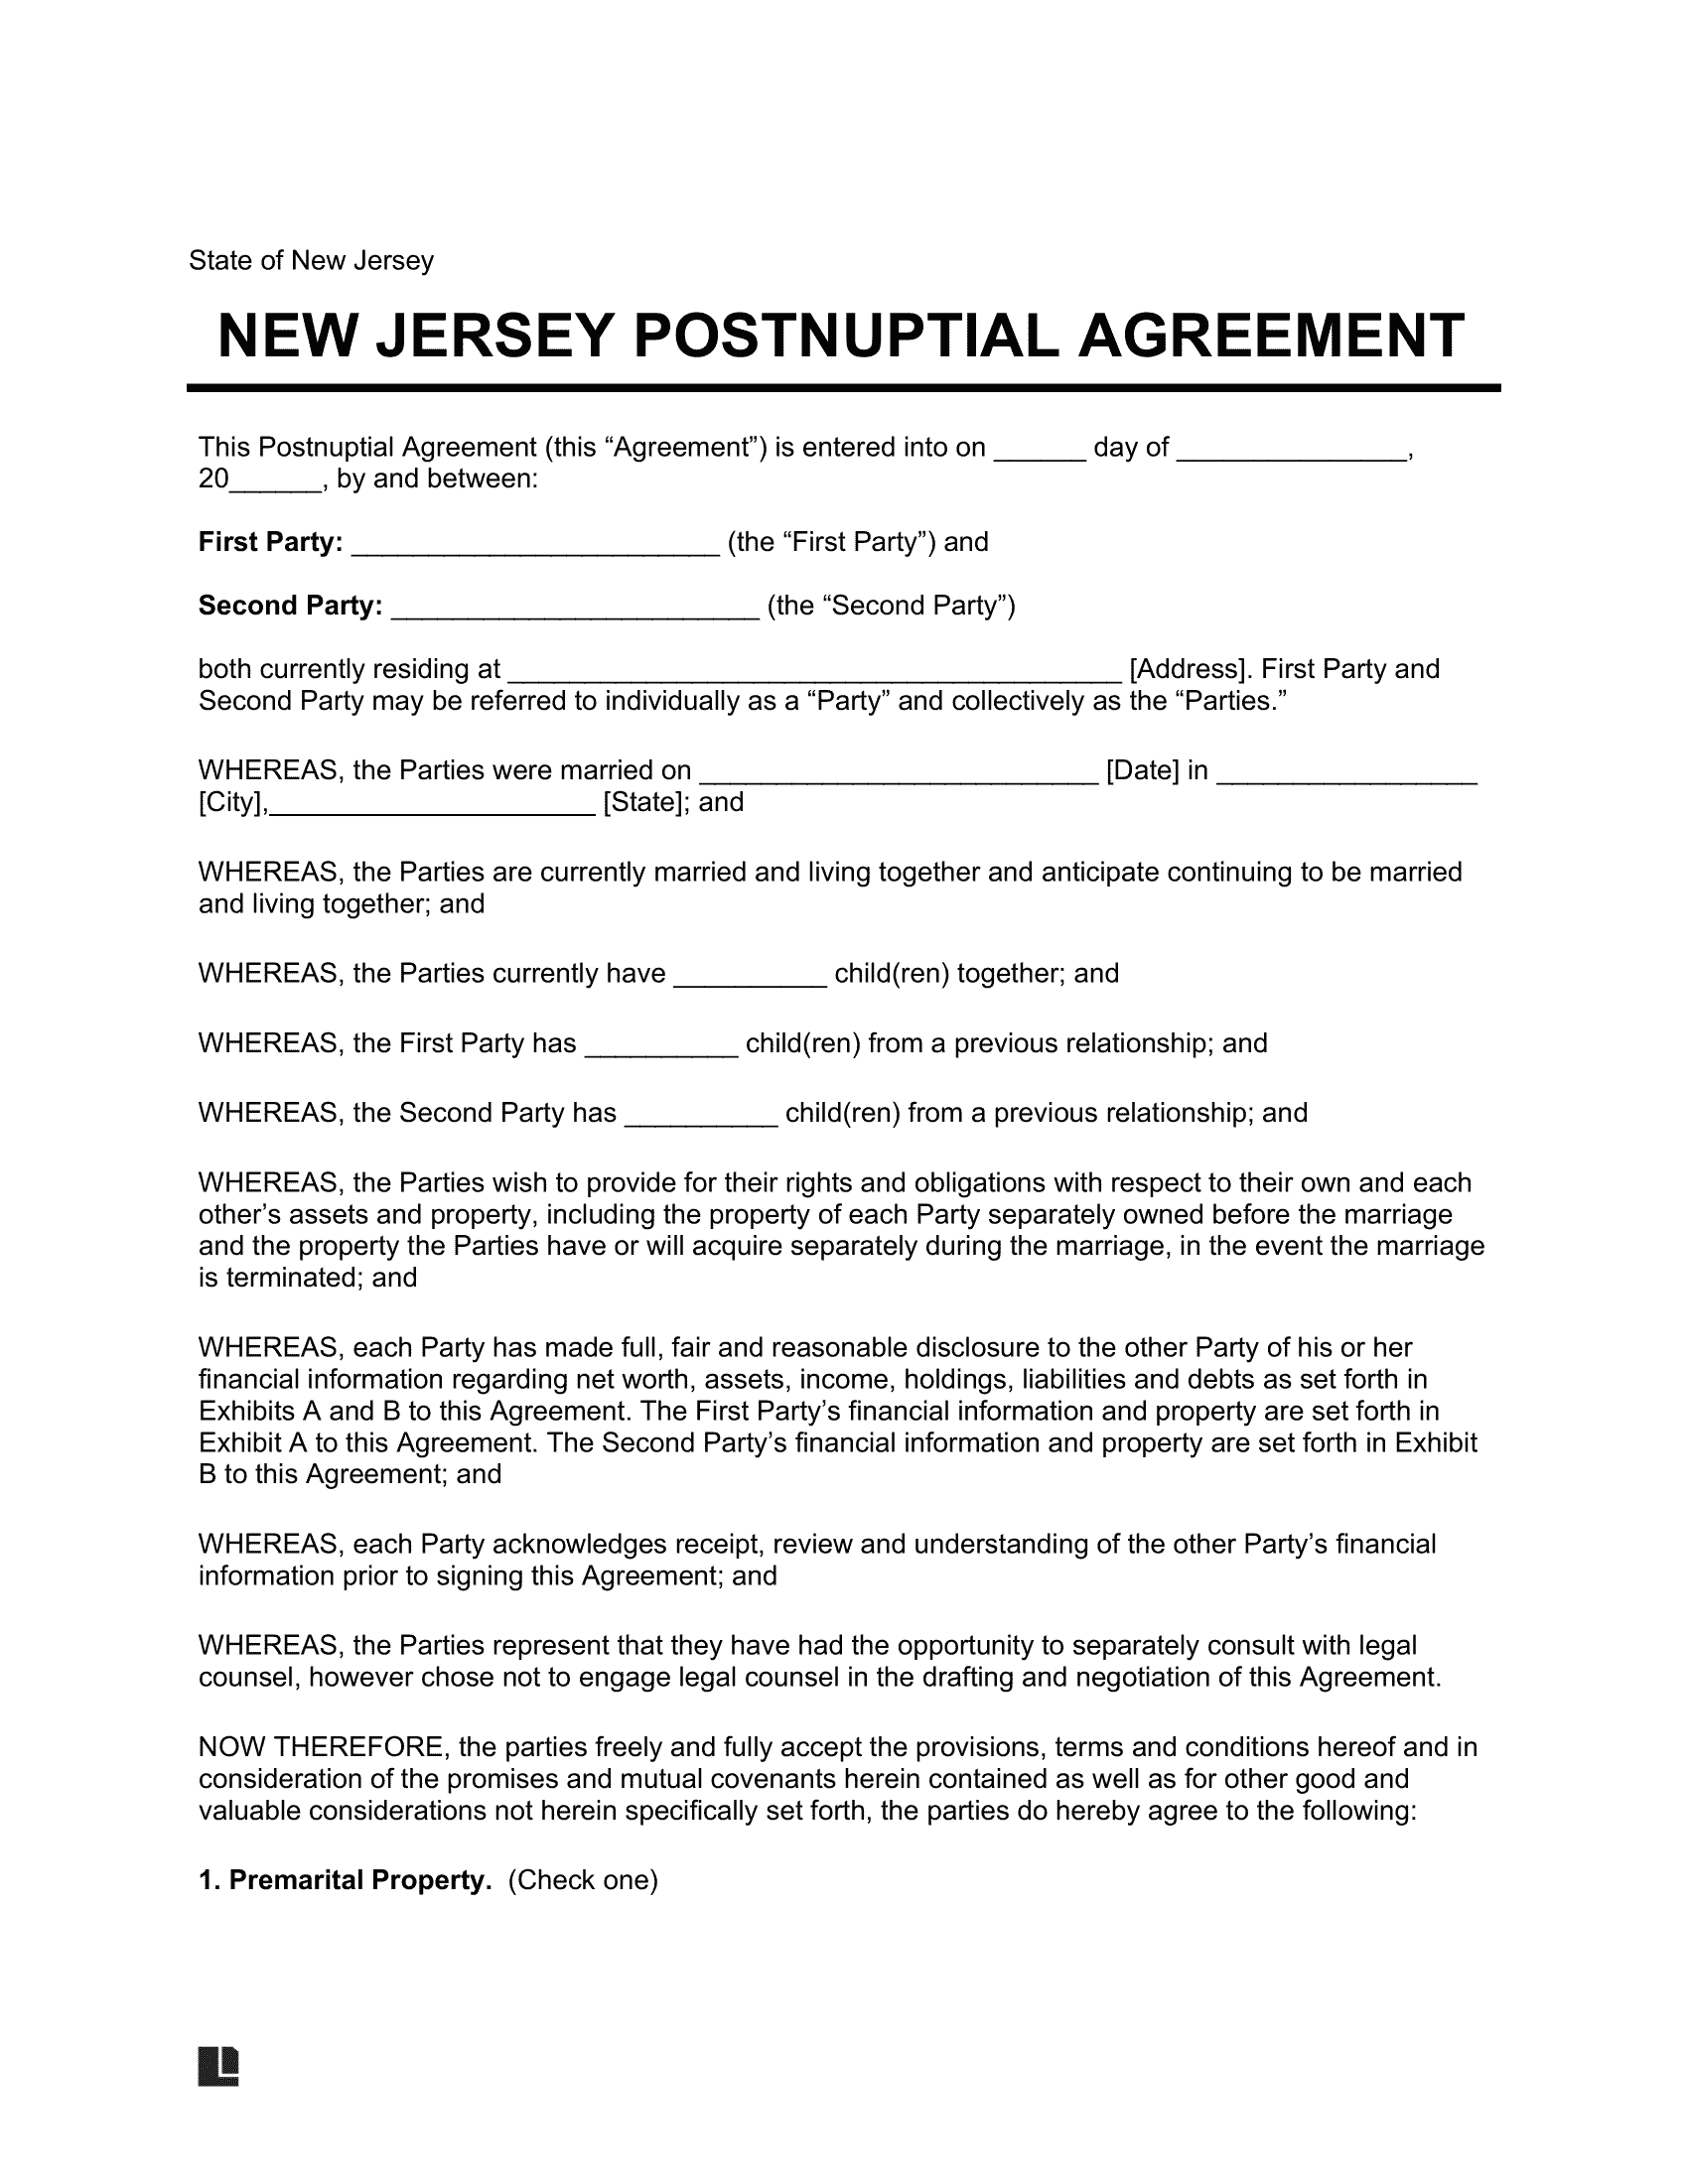 New Jersey Postnuptial Agreement Template